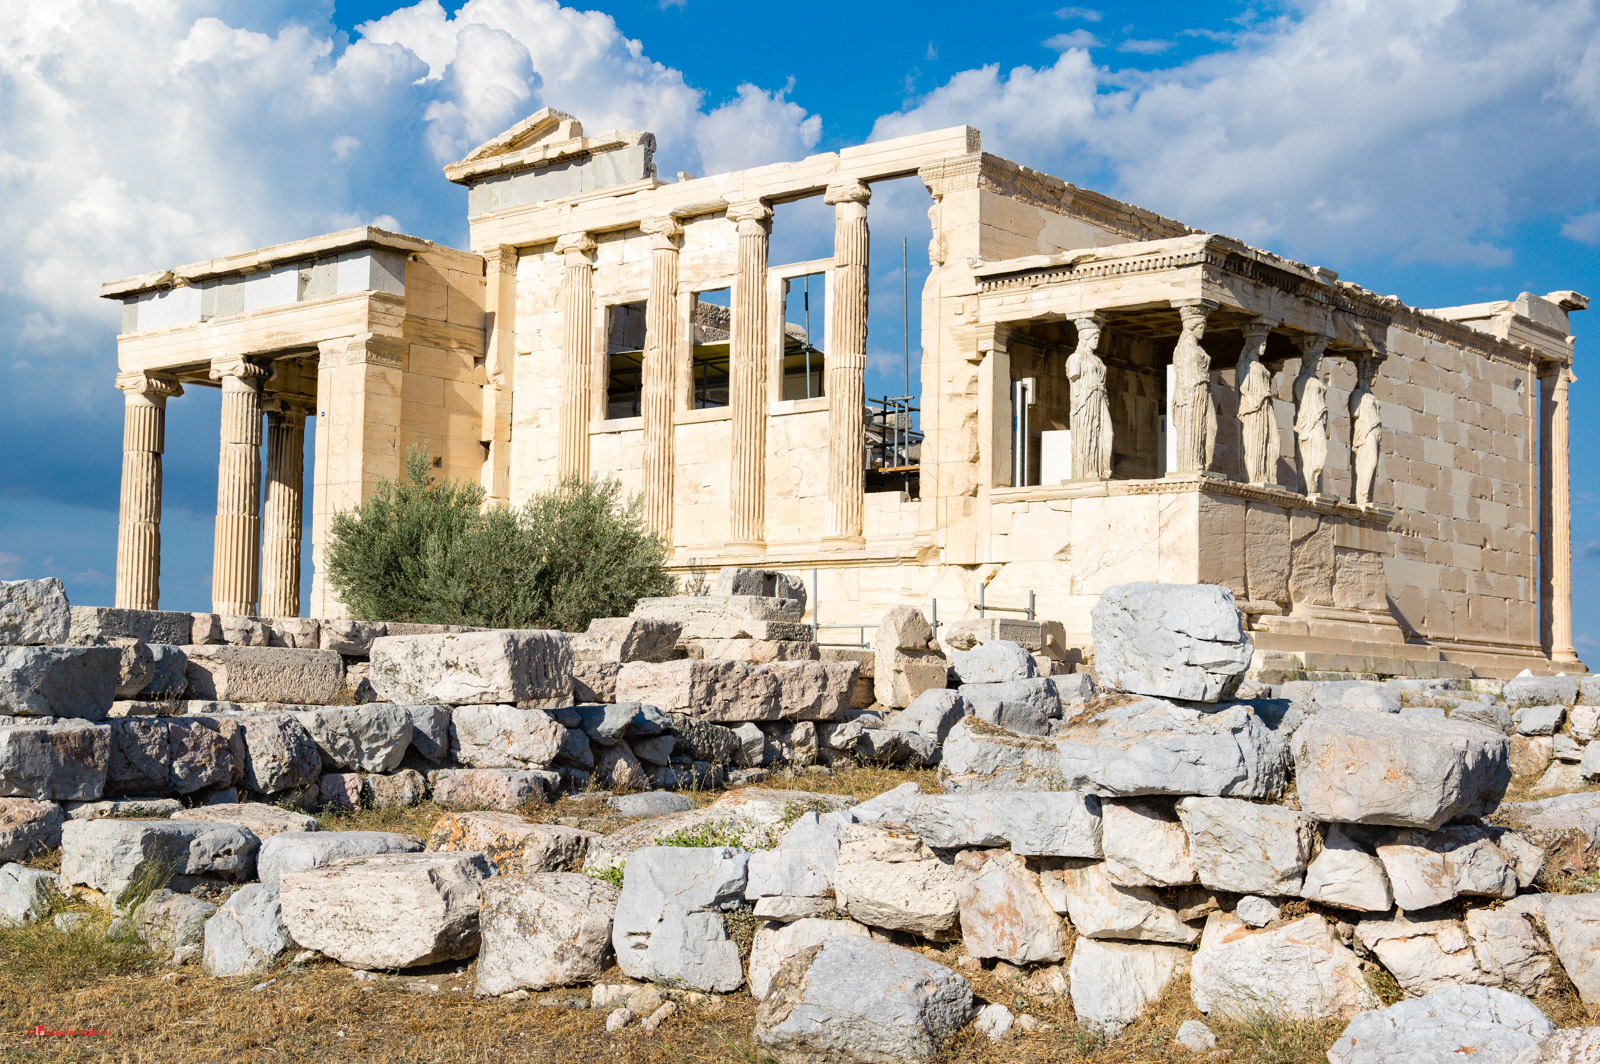 Erechtheion Temple and the Porch of the Caryatids